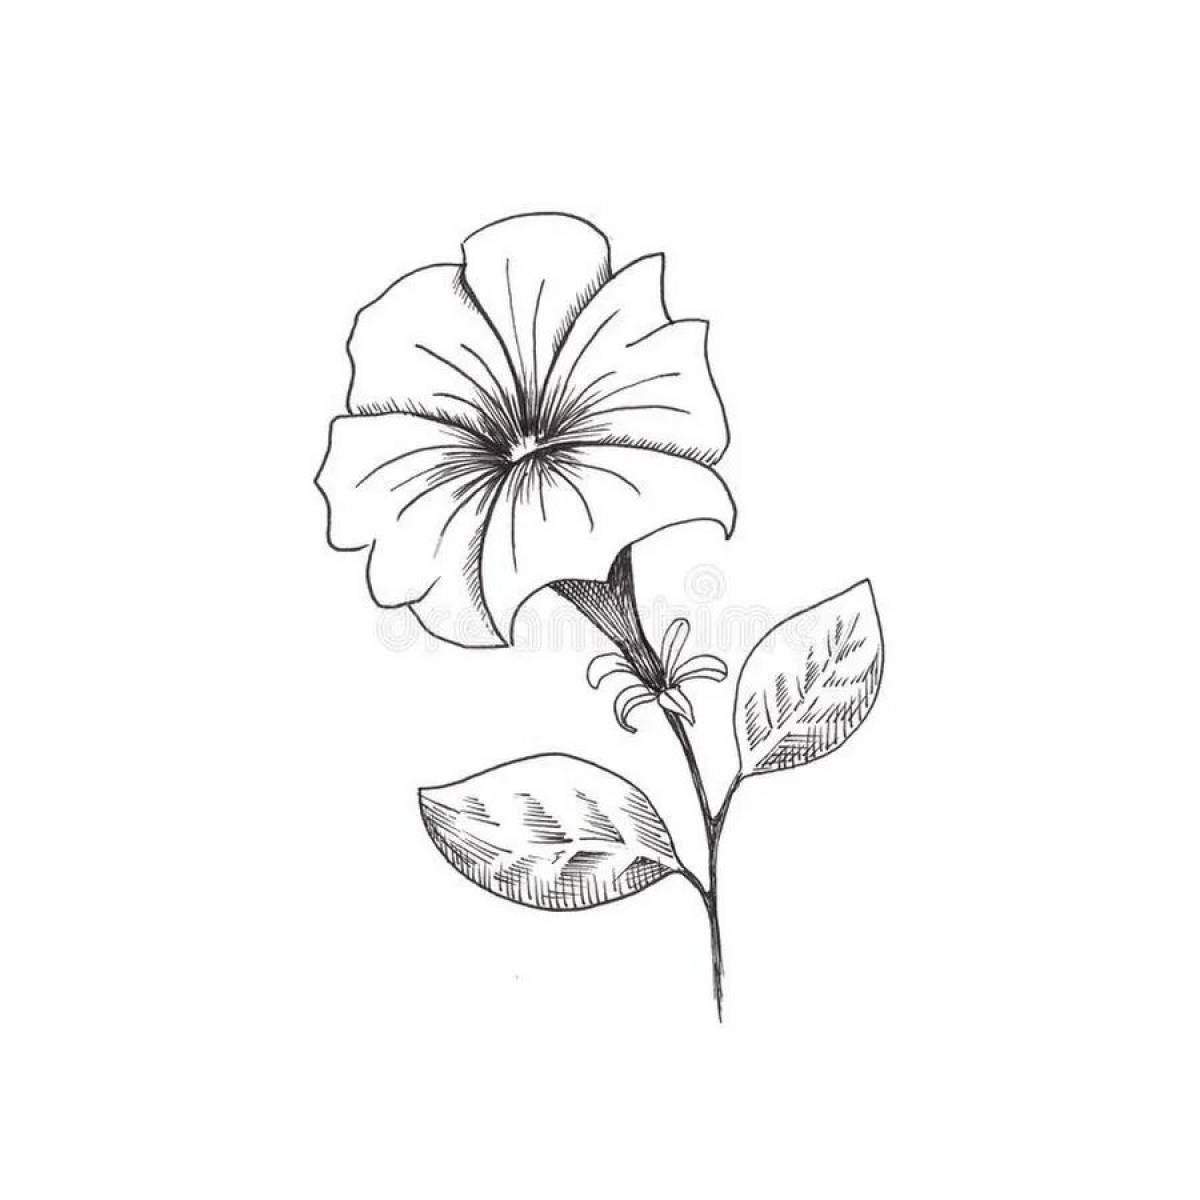 Awesome petunias coloring page